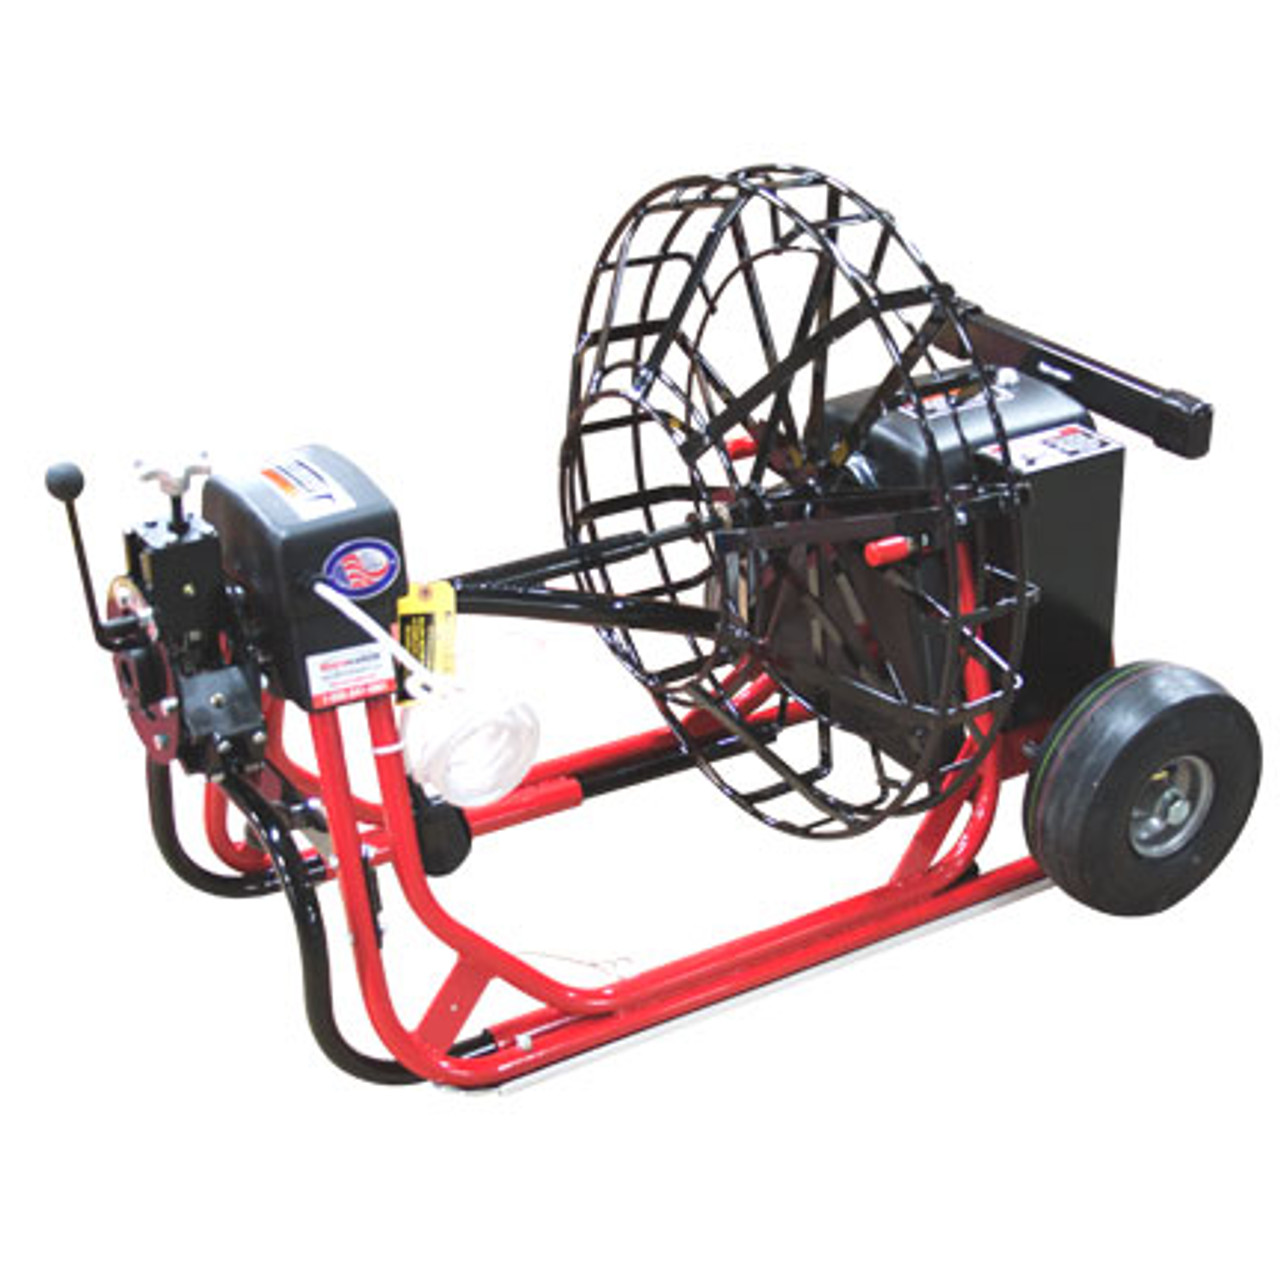 Commecial Sewer Snake Drain Auger Cleaner 100 Ft Long 1/2 x 100